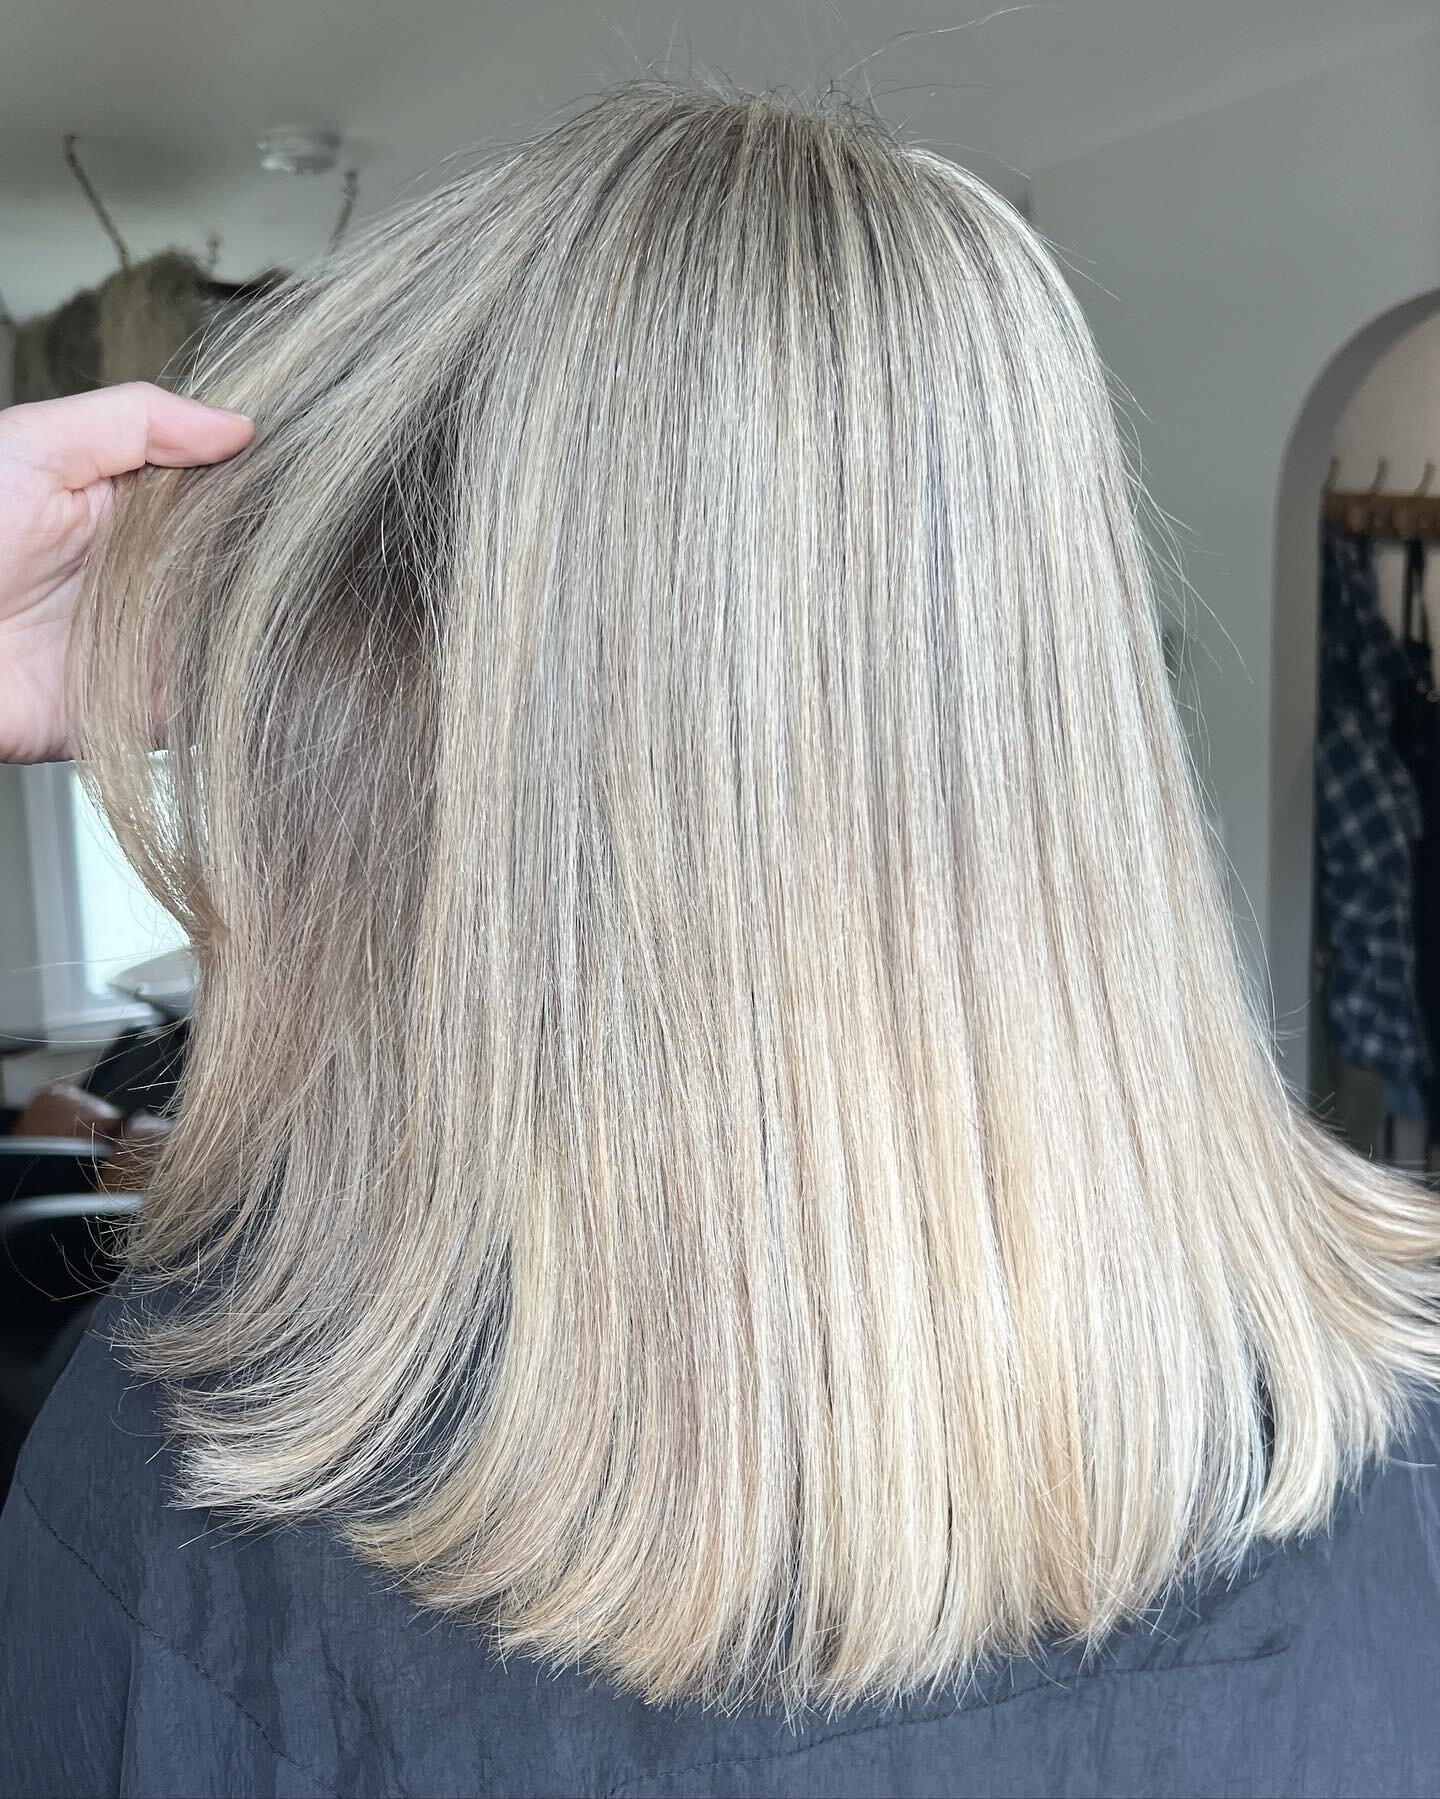 Just in time for summer ☀️ Swipe to see before of this epic makeover blonde 👉🏻 

#518salon #518hair #lathamny #makeover #blonde #foils #colorcorrection #euforacolor #euforapro #extra